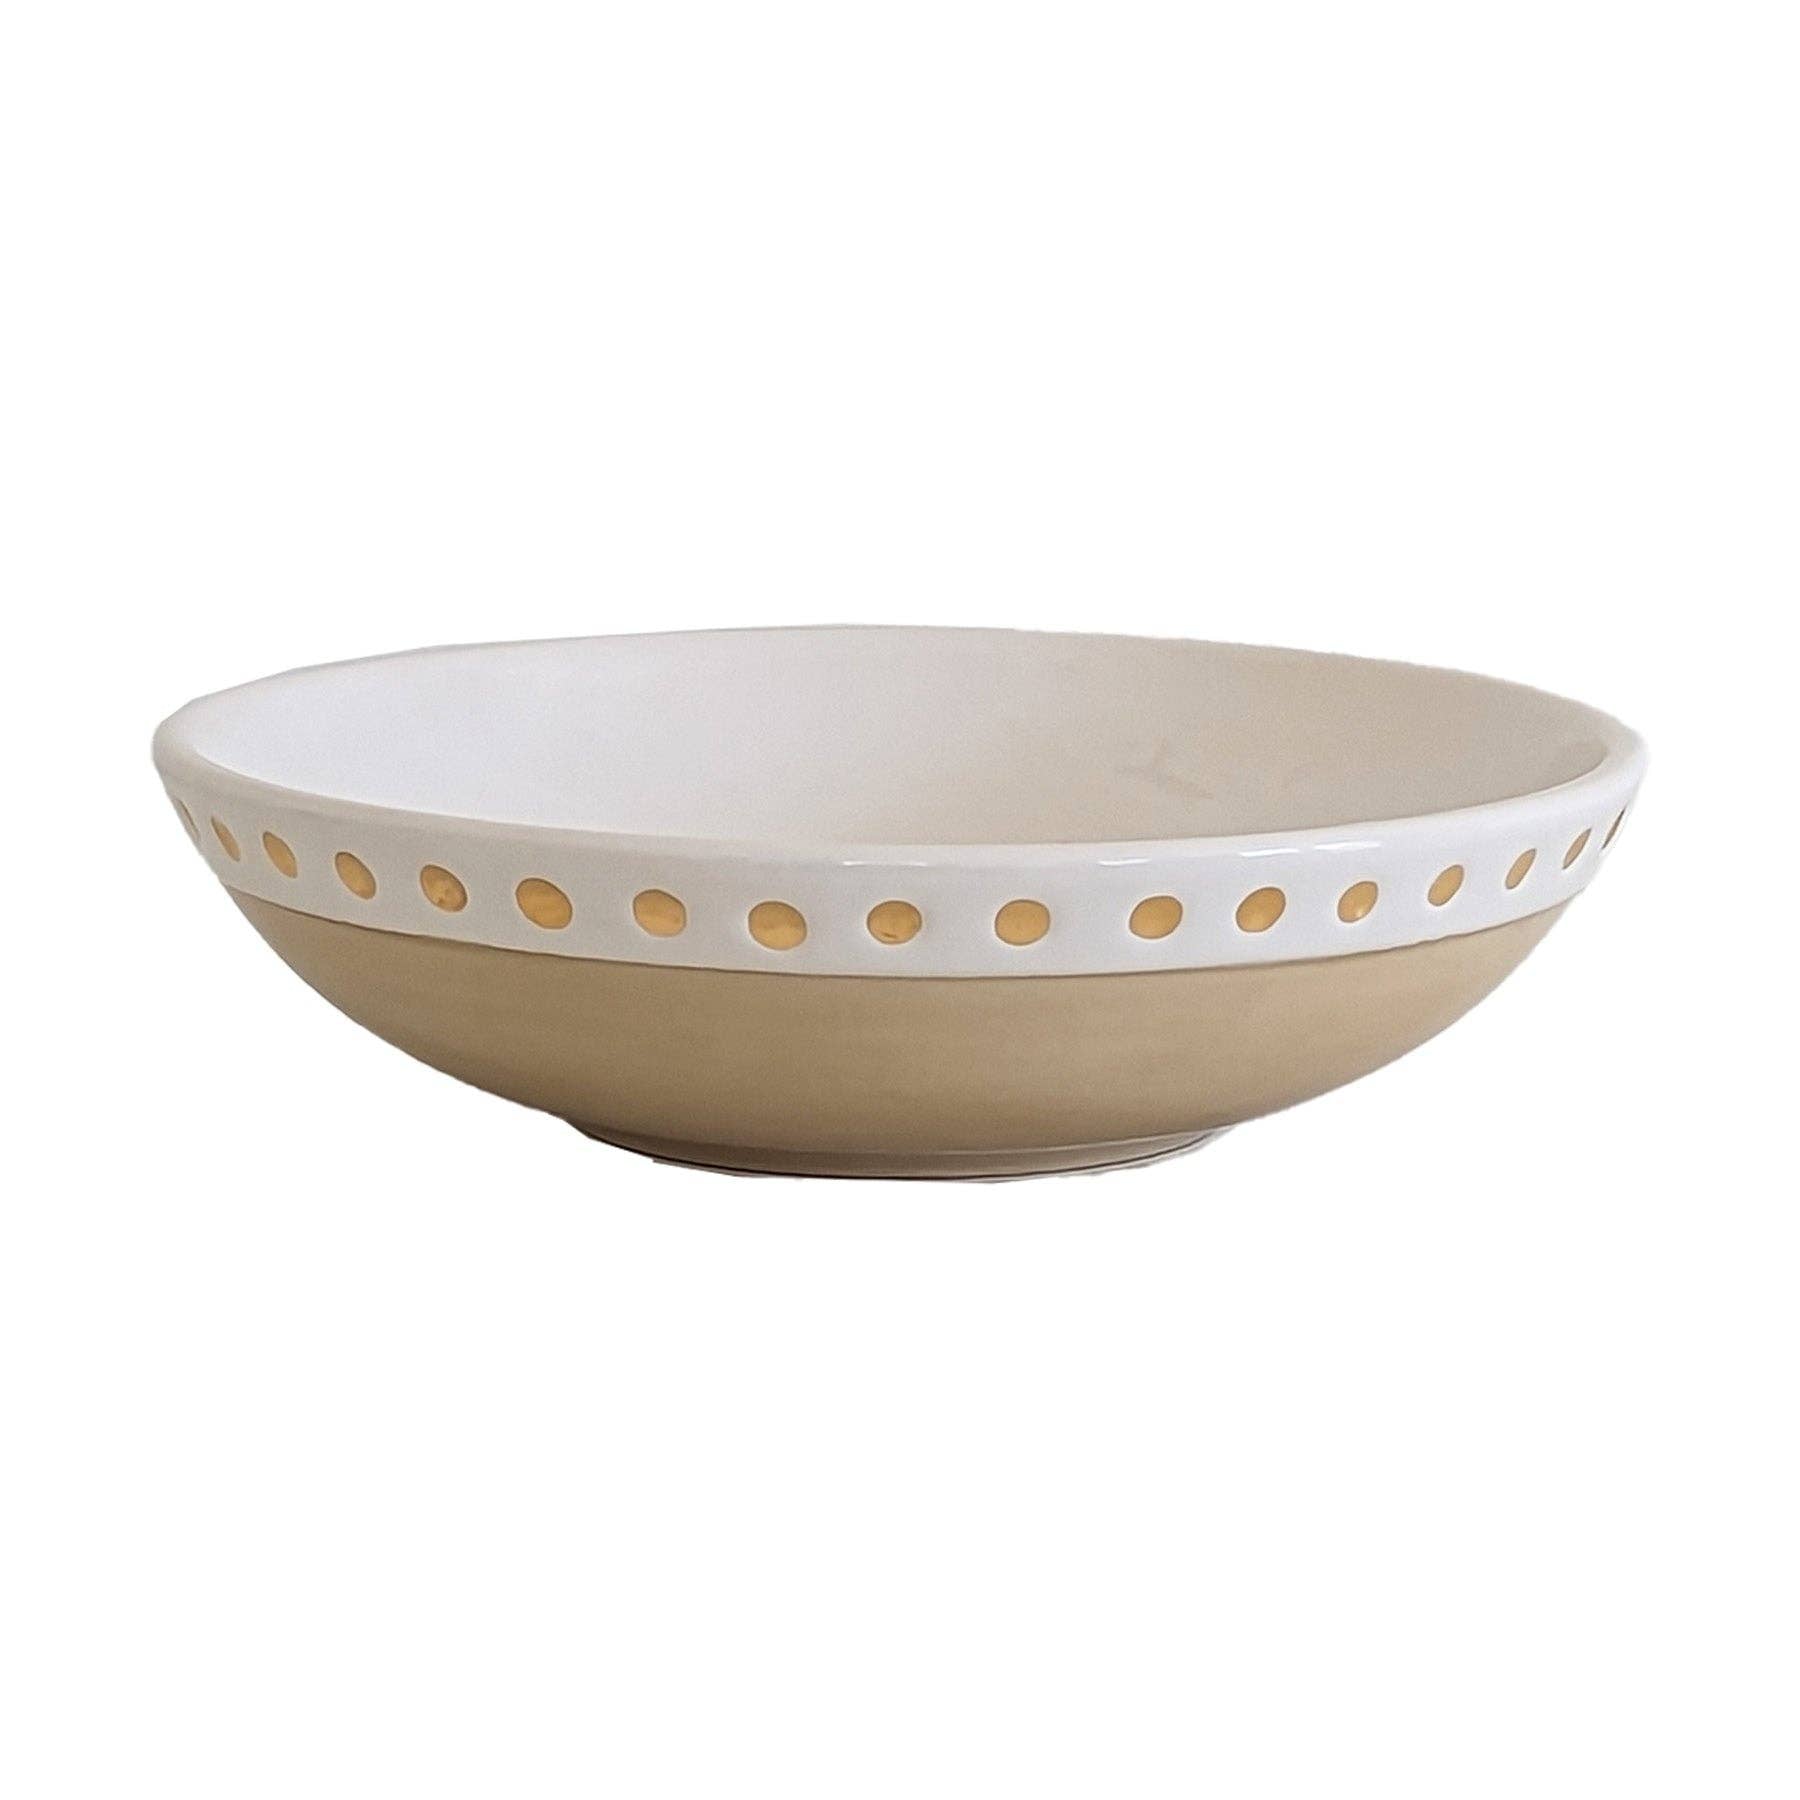 Goddess Bowl with 22K Gold Accent: Bowl / Sea Glass